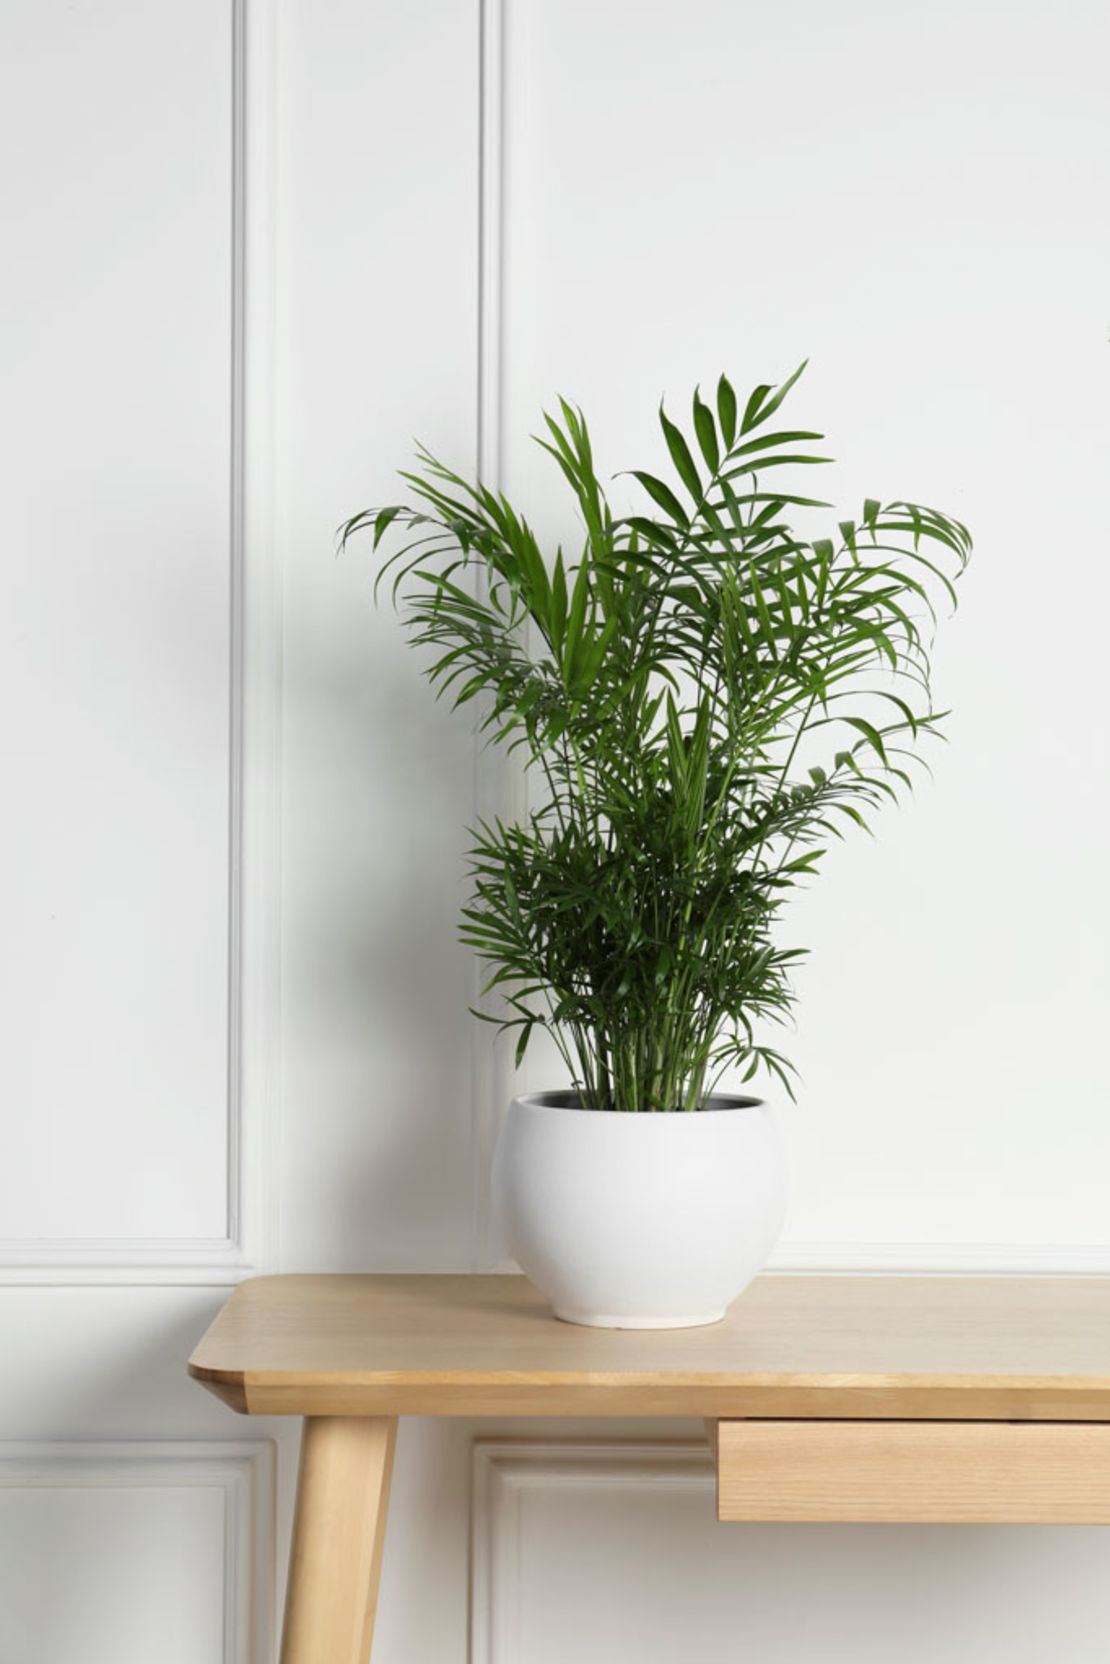 For a tough-as-nails palm, try growing bamboo palm <em>(Chamaedorea seifrizii)</em>. It can reach 3 to 8 feet indoors.